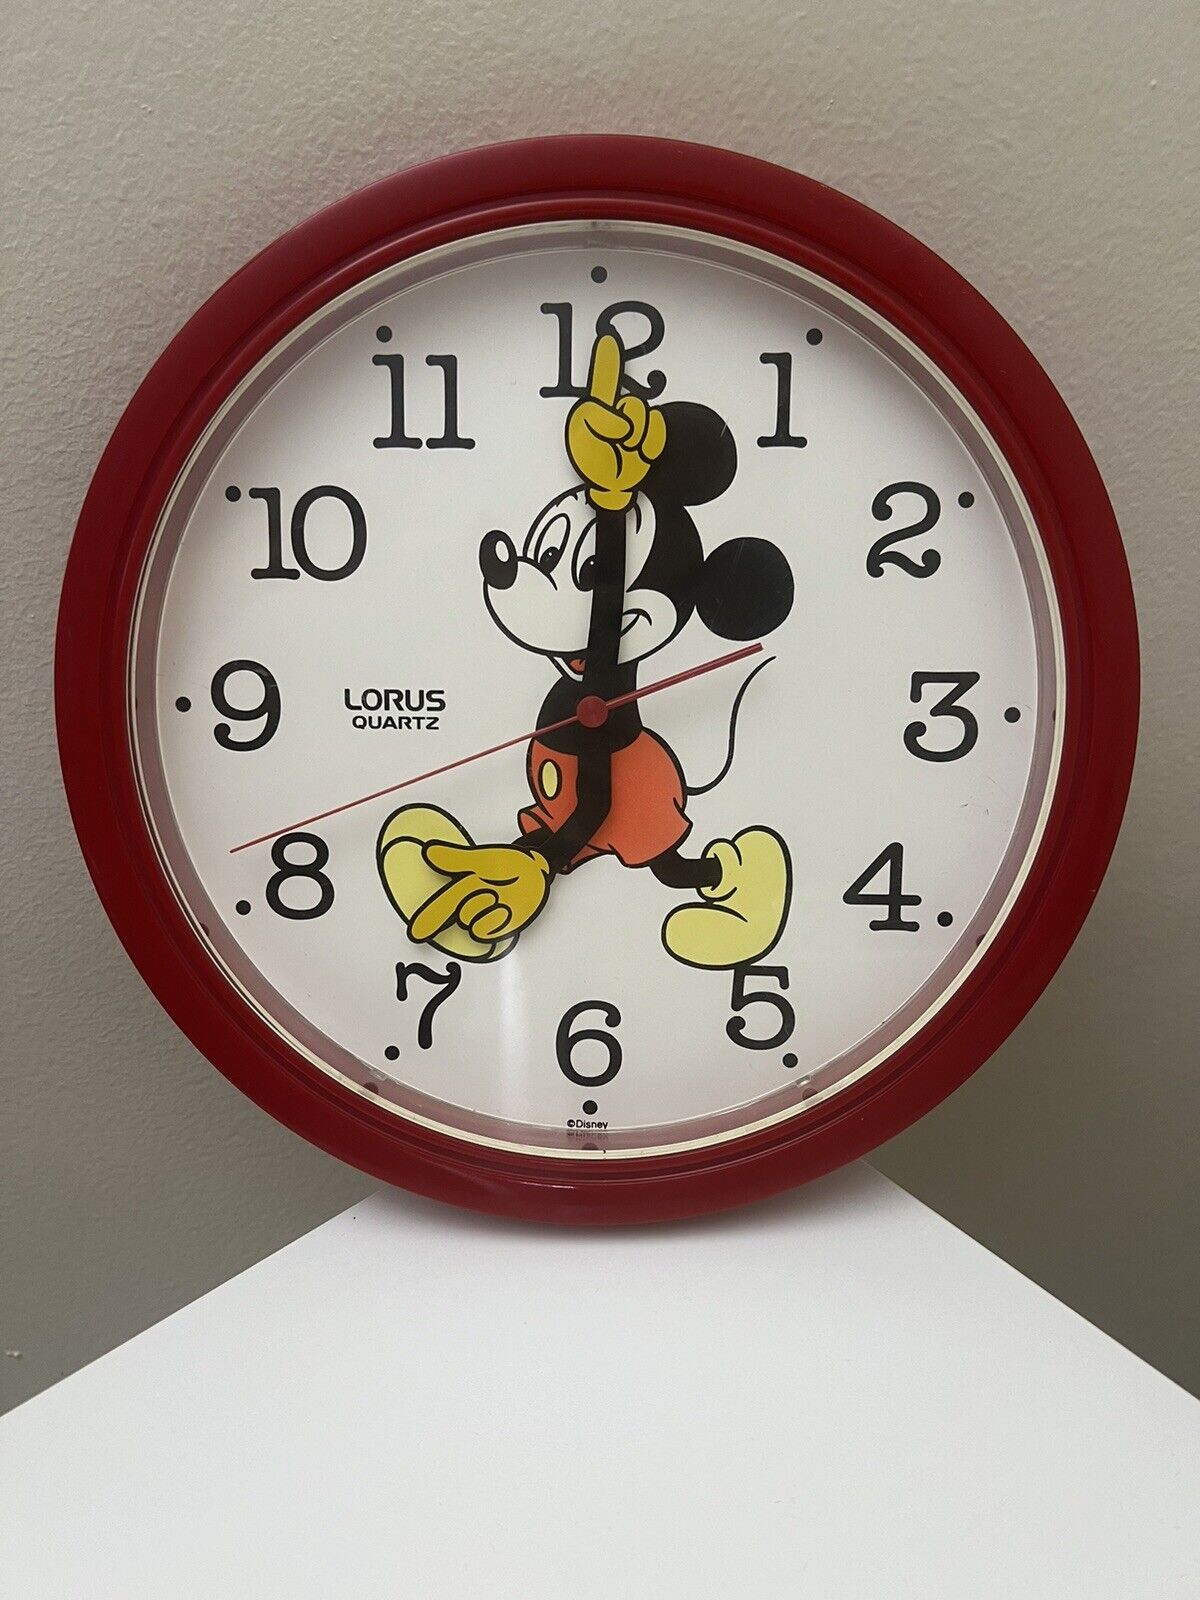 Vintage 10” Lorus Quartz Disney Mickey Mouse Moving Hands Red White Wall Clock